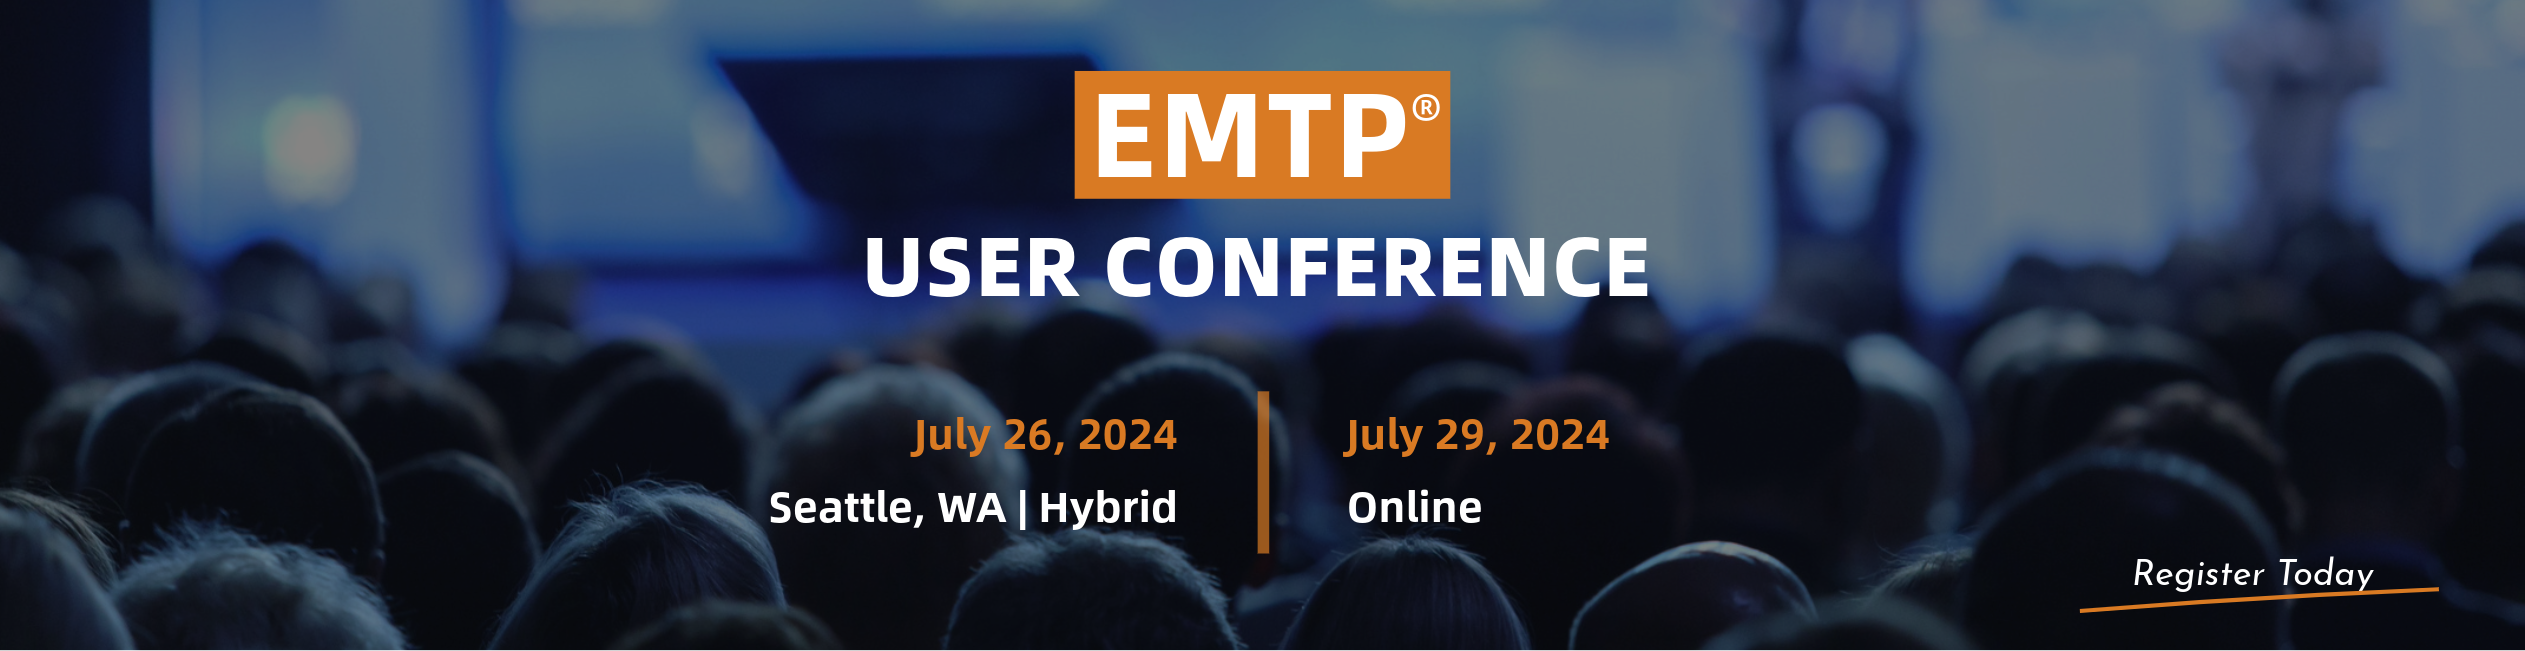 EMTP User Conference 2024 - Seattle, WA